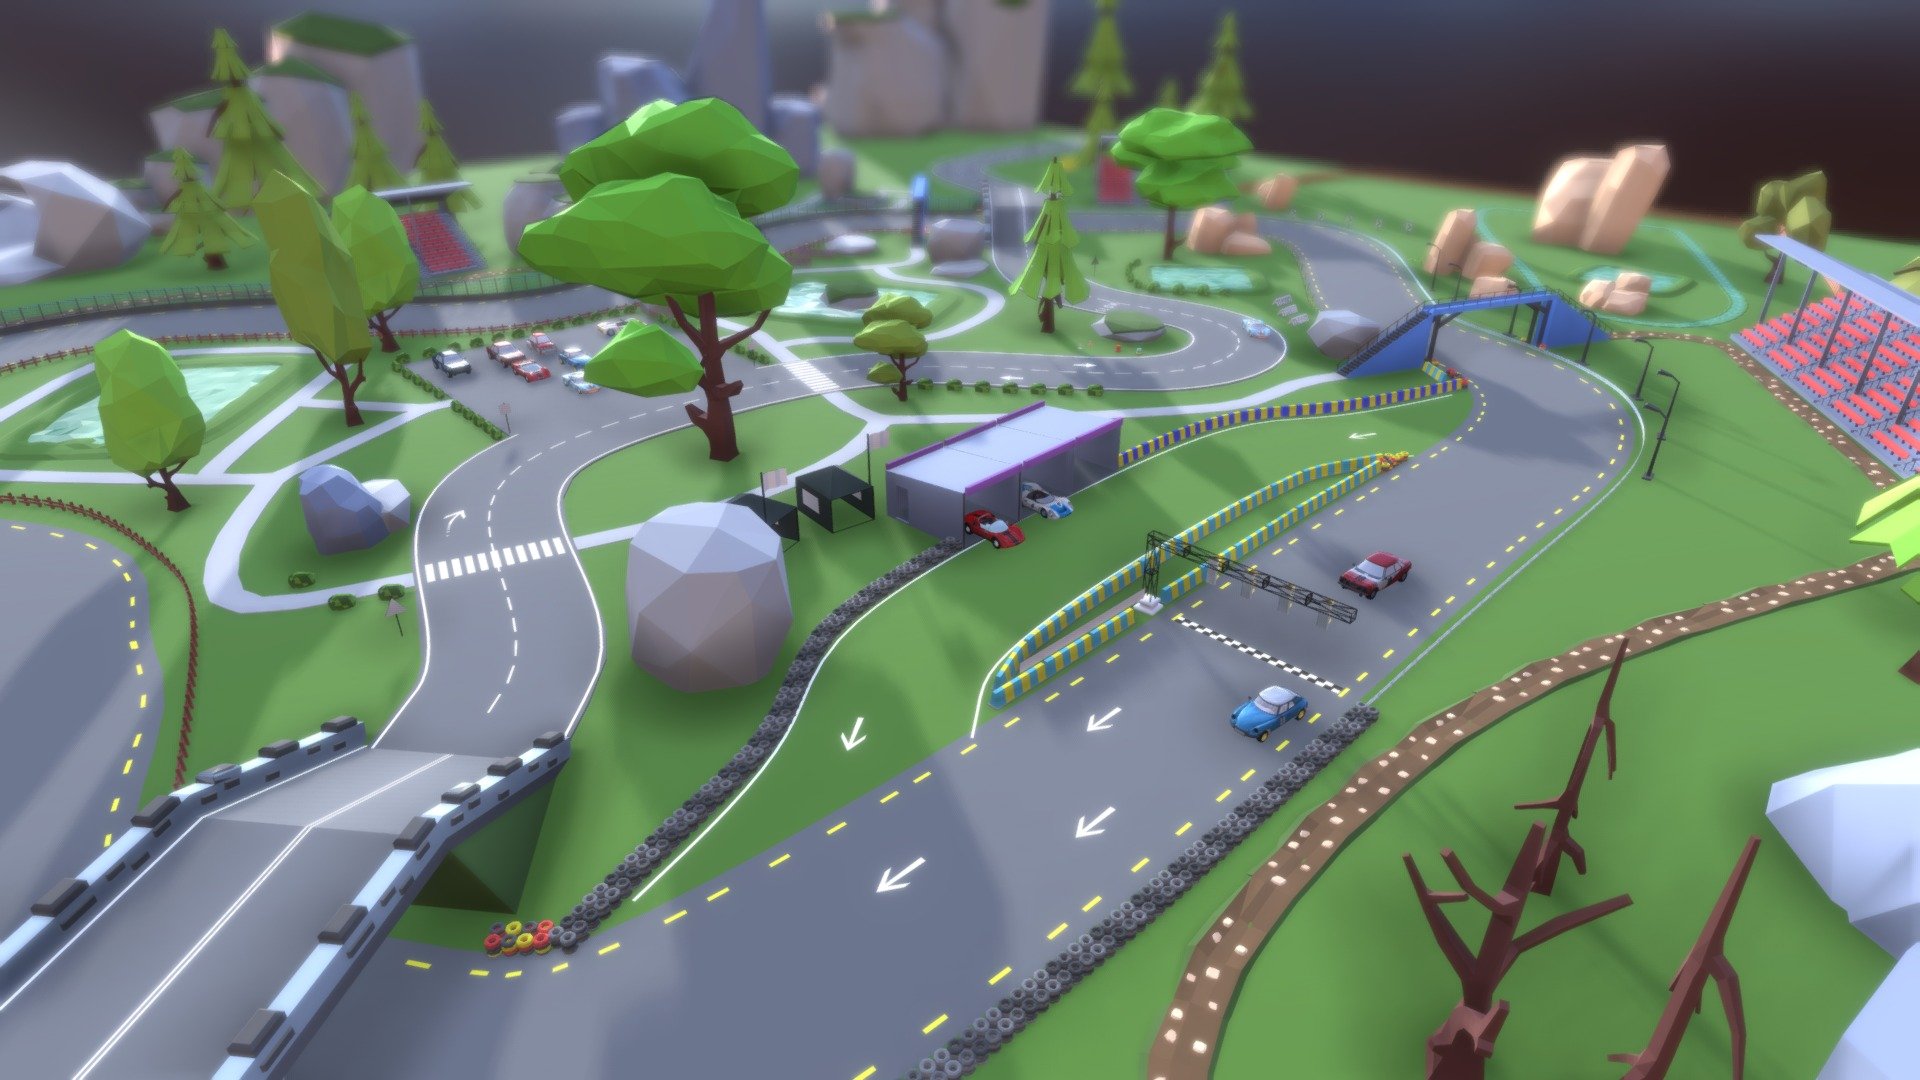 A model of the race track . Everything made in the 2.8 blender. The car models are from the Vintage Racing Cars Pack 3d model